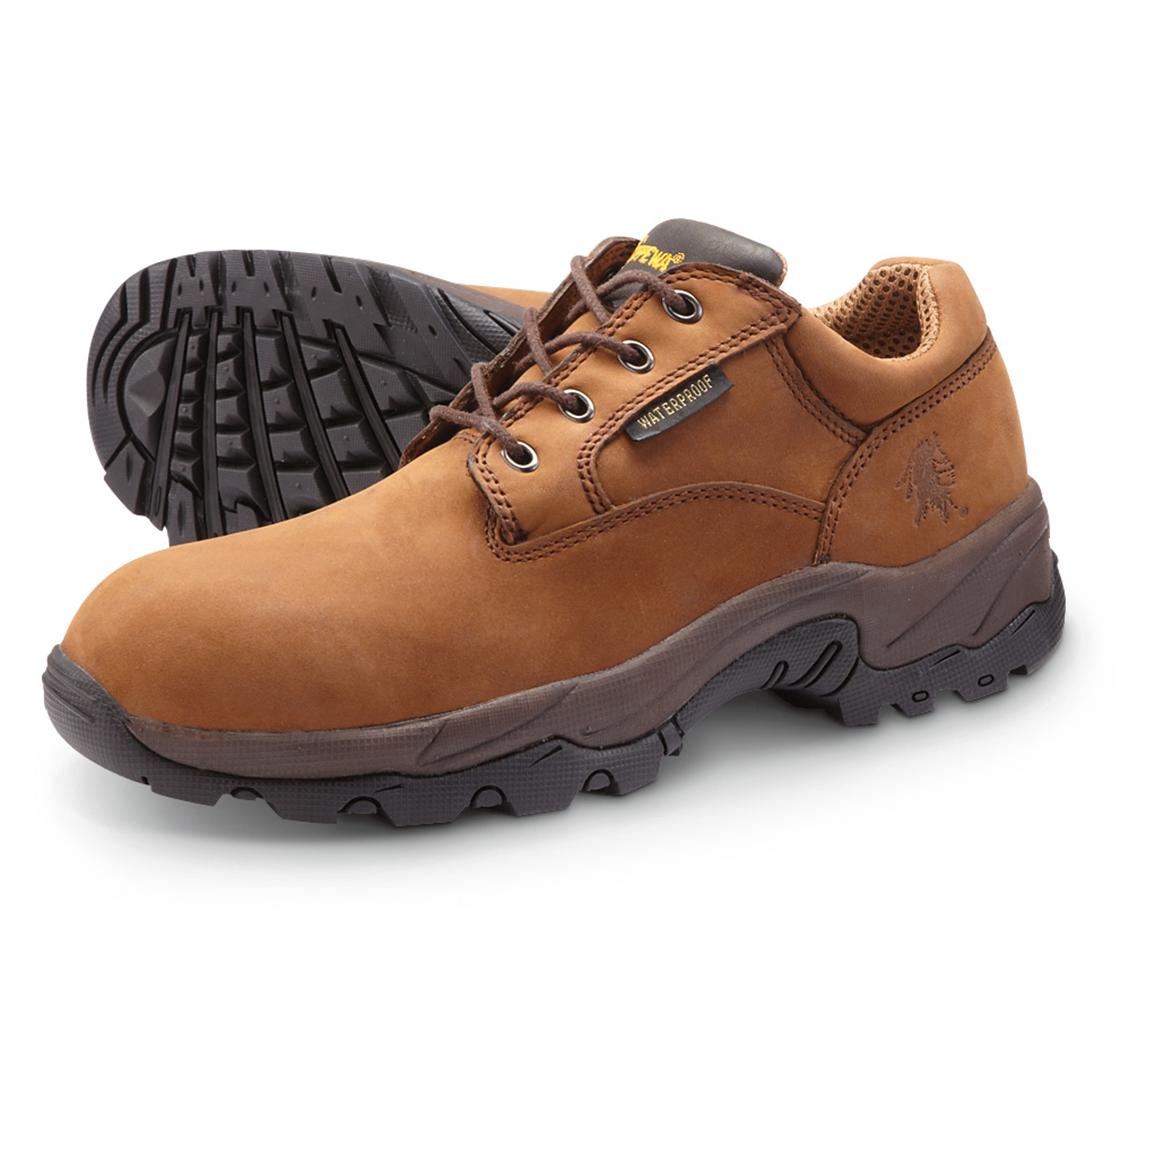 Men's Chippewa Boots Waterproof Oxford Work Shoes, Brown - 578583 ...